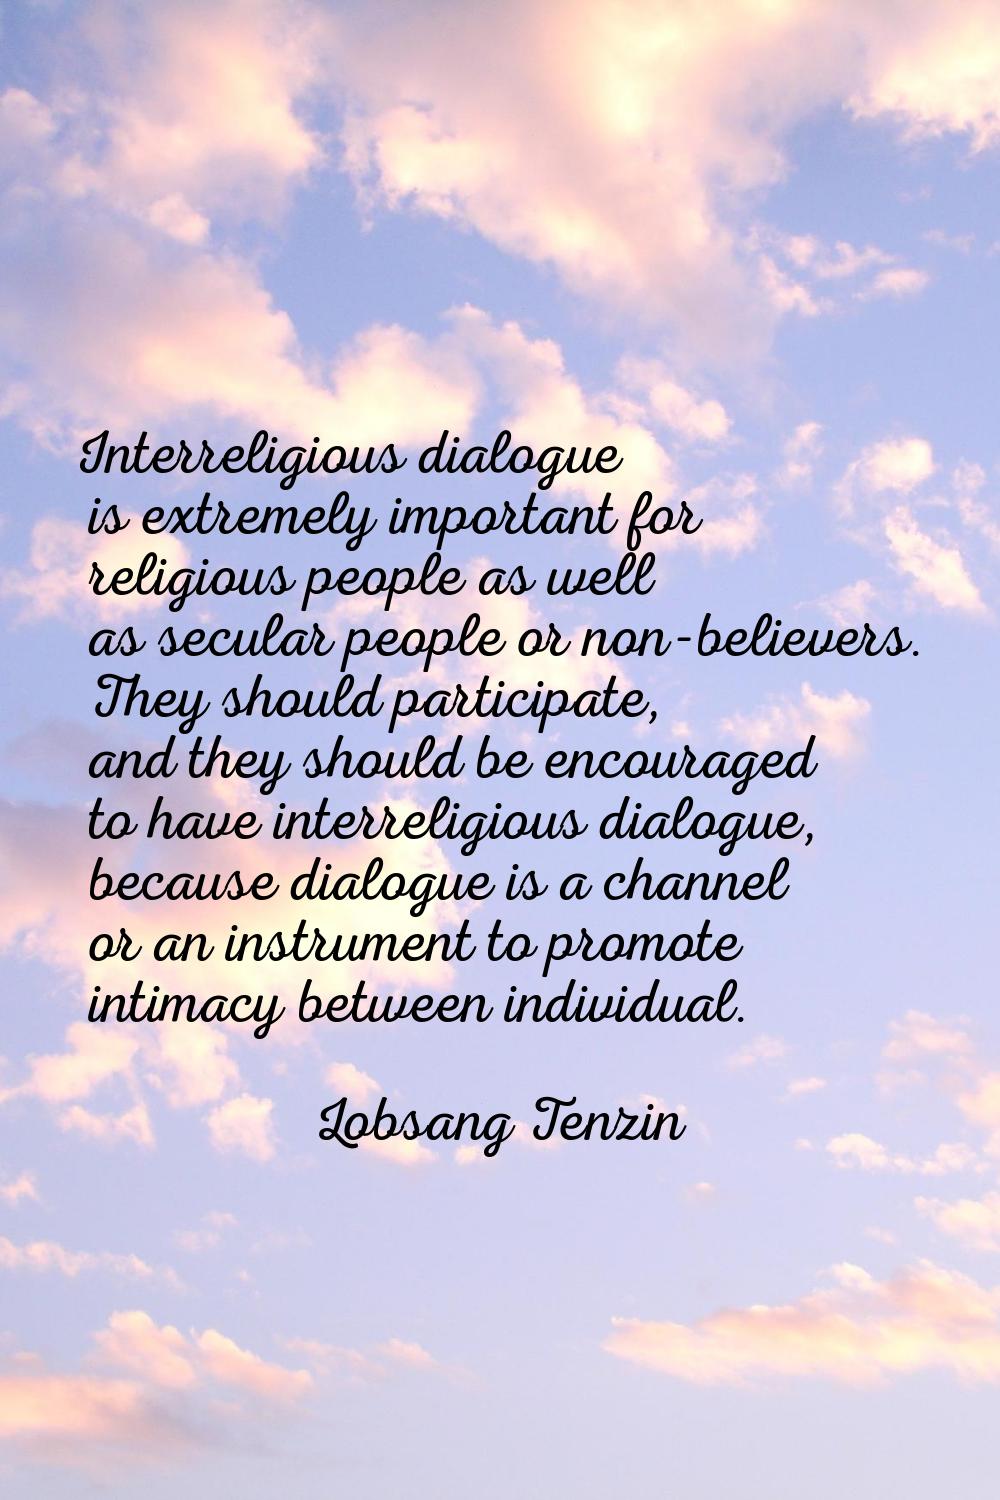 Interreligious dialogue is extremely important for religious people as well as secular people or no